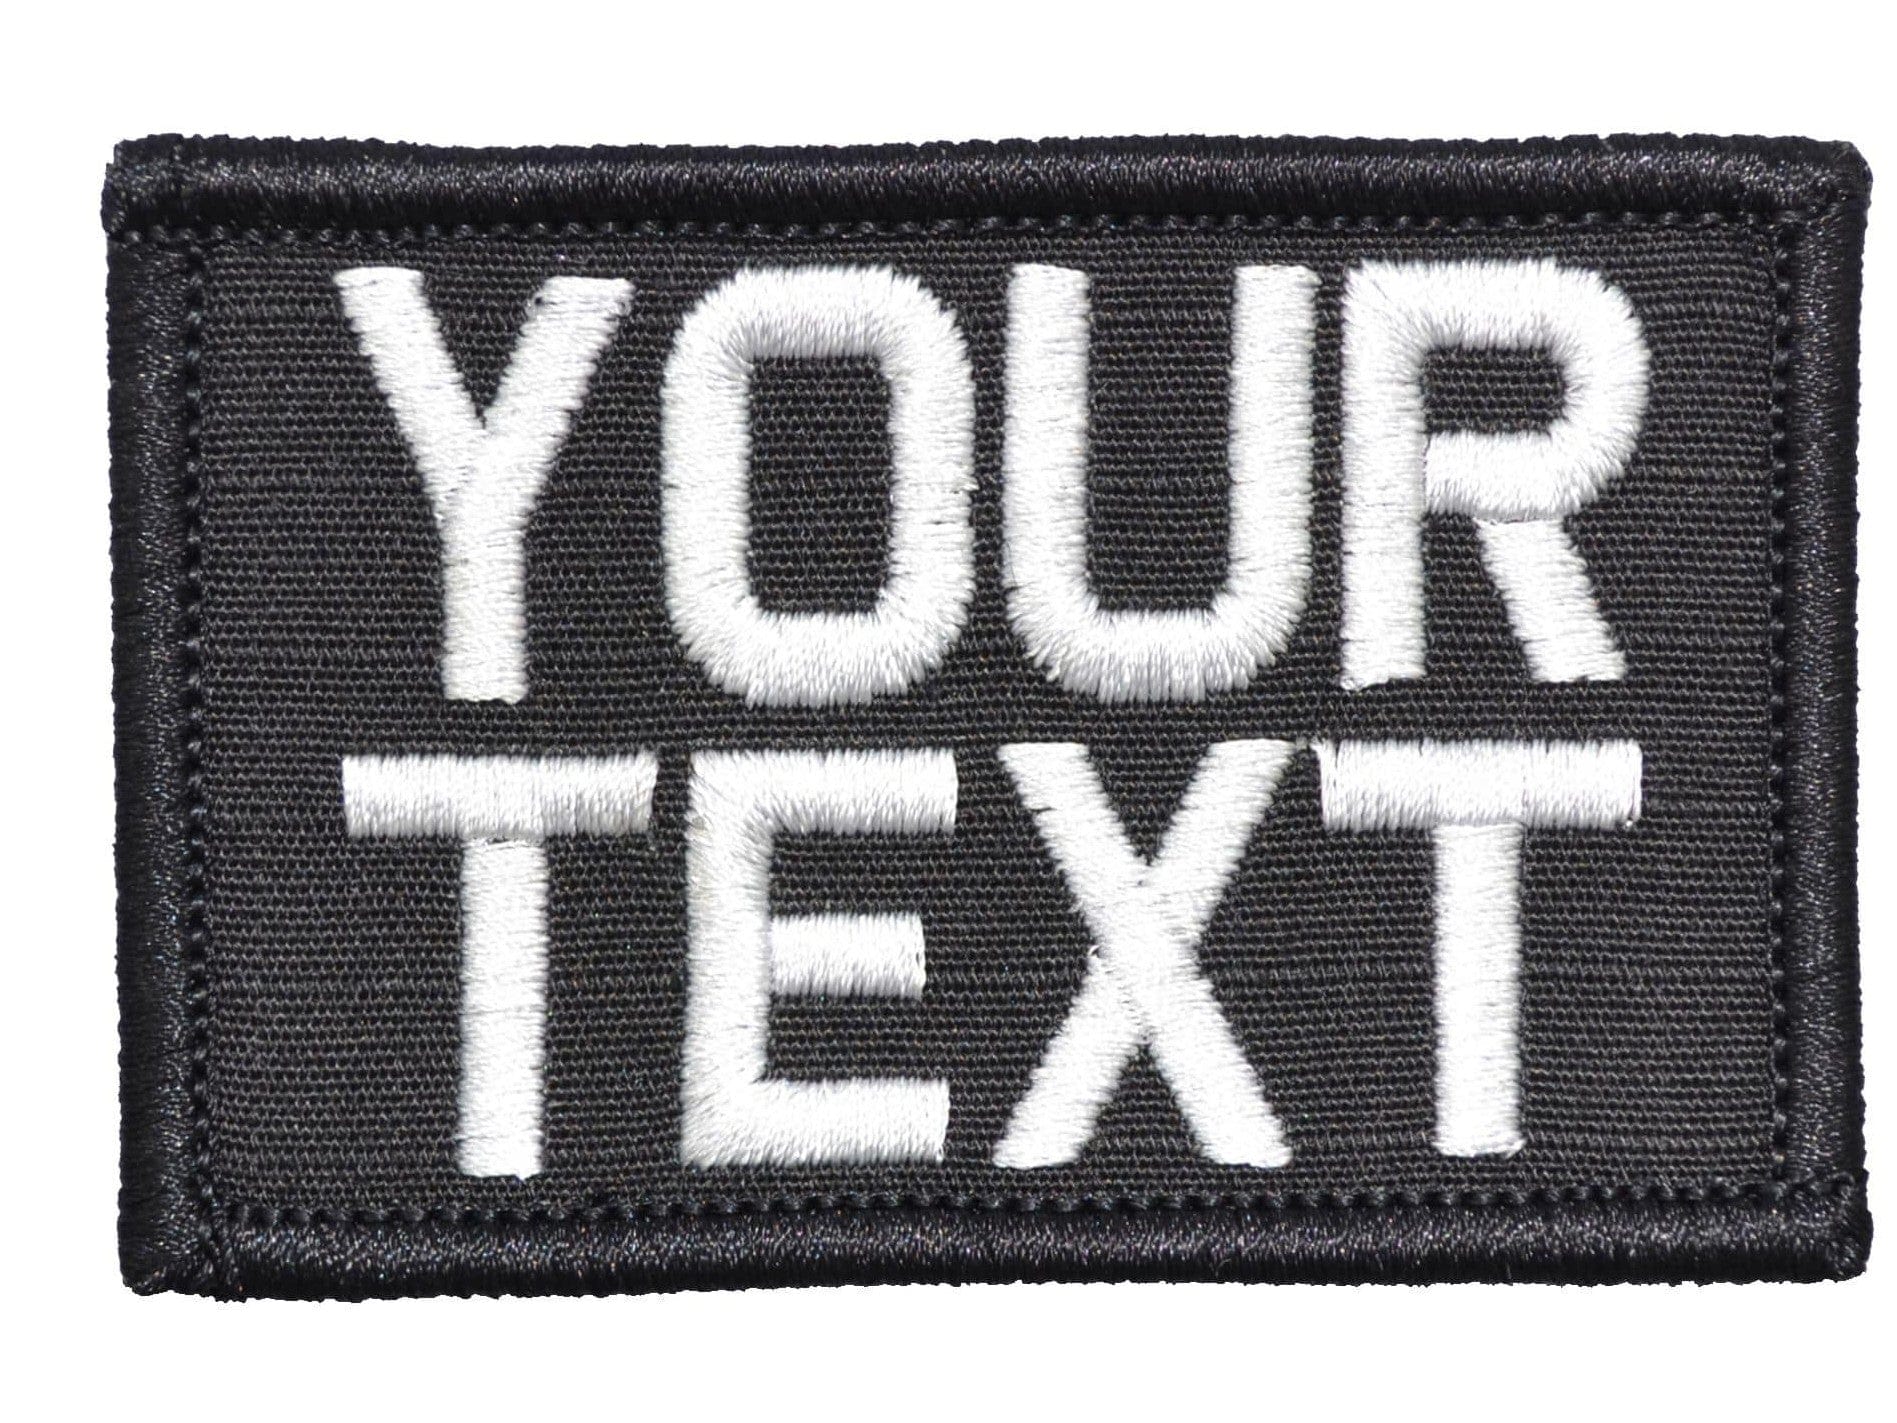 Custom Text Military 2x3 inch Patch. Your Text.